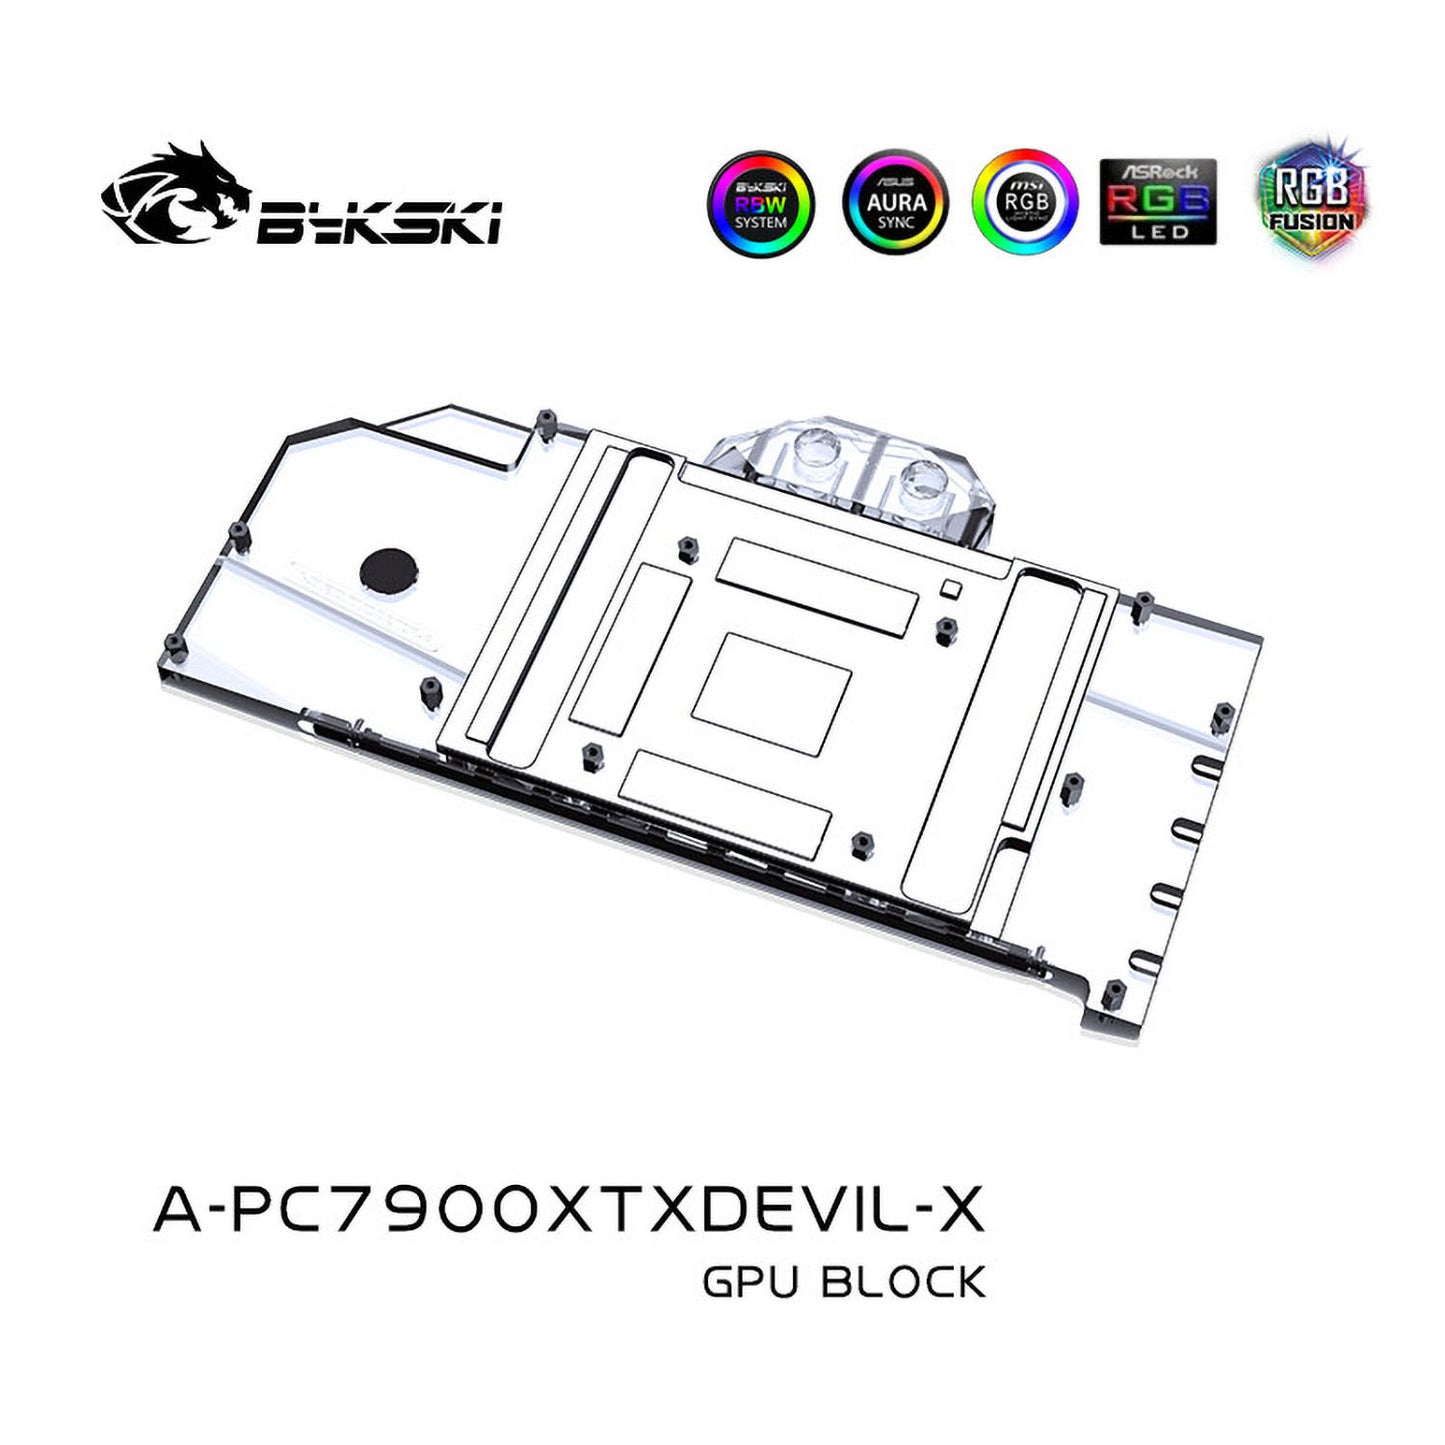 Bykski GPU Water Block For Powercolor RX 7900 XTX Red Devil, Full Cover With Backplate PC Water Cooling Cooler, A-PC7900XTXDEVIL-X